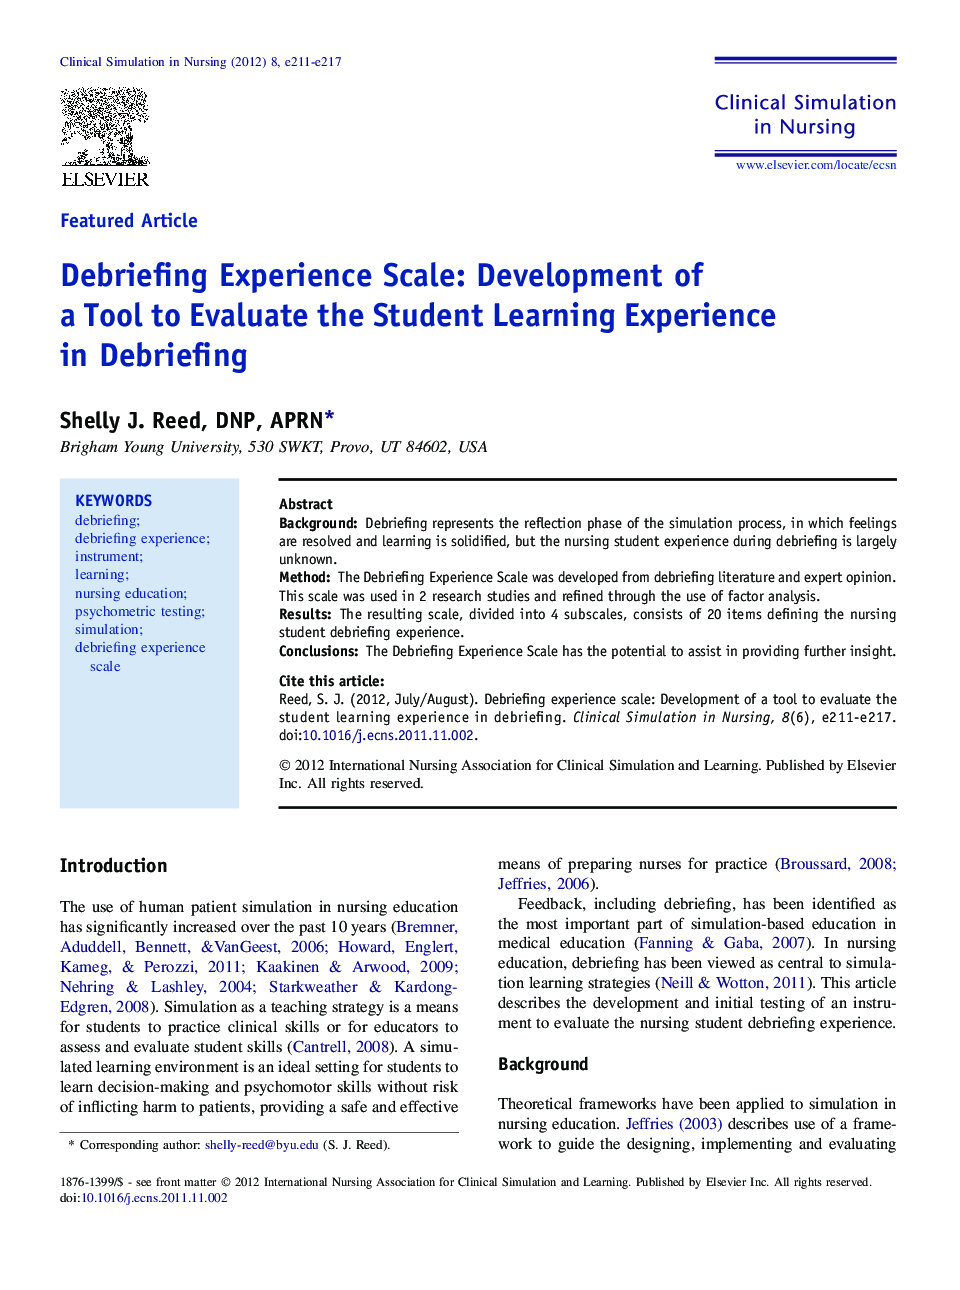 Debriefing Experience Scale: Development of a Tool to Evaluate the Student Learning Experience in Debriefing